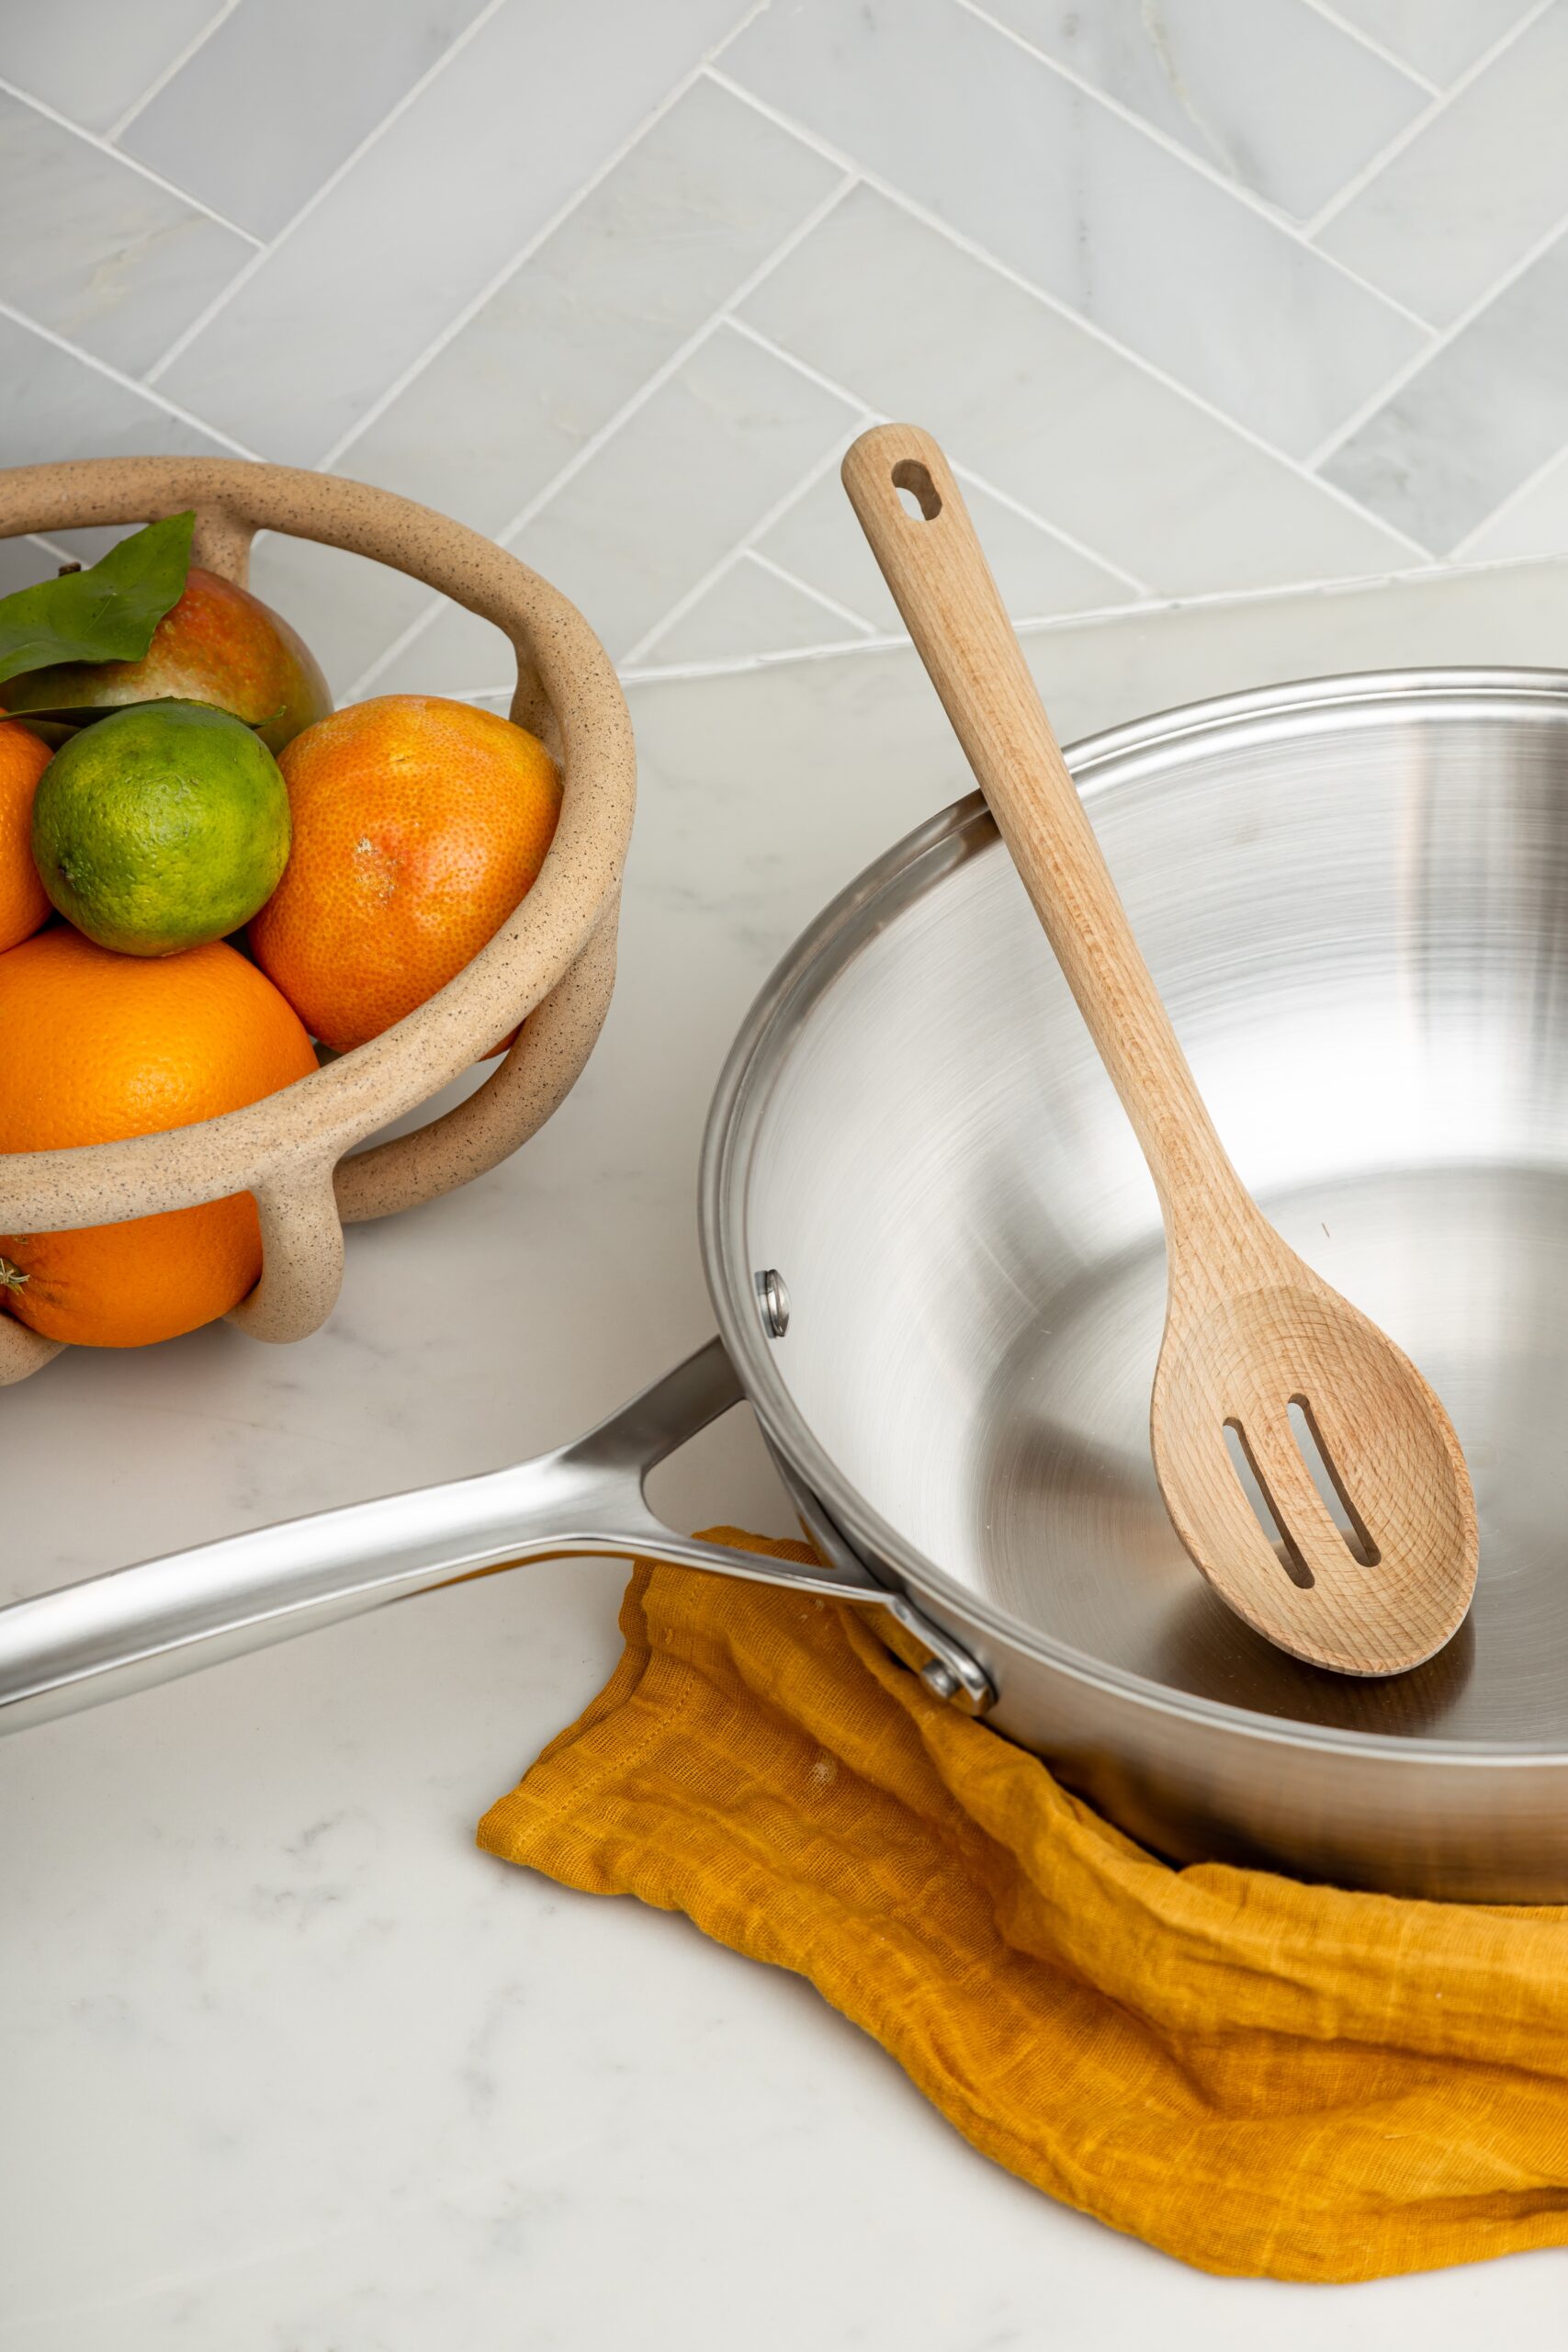 What Is The Best Cookware Brand To Buy